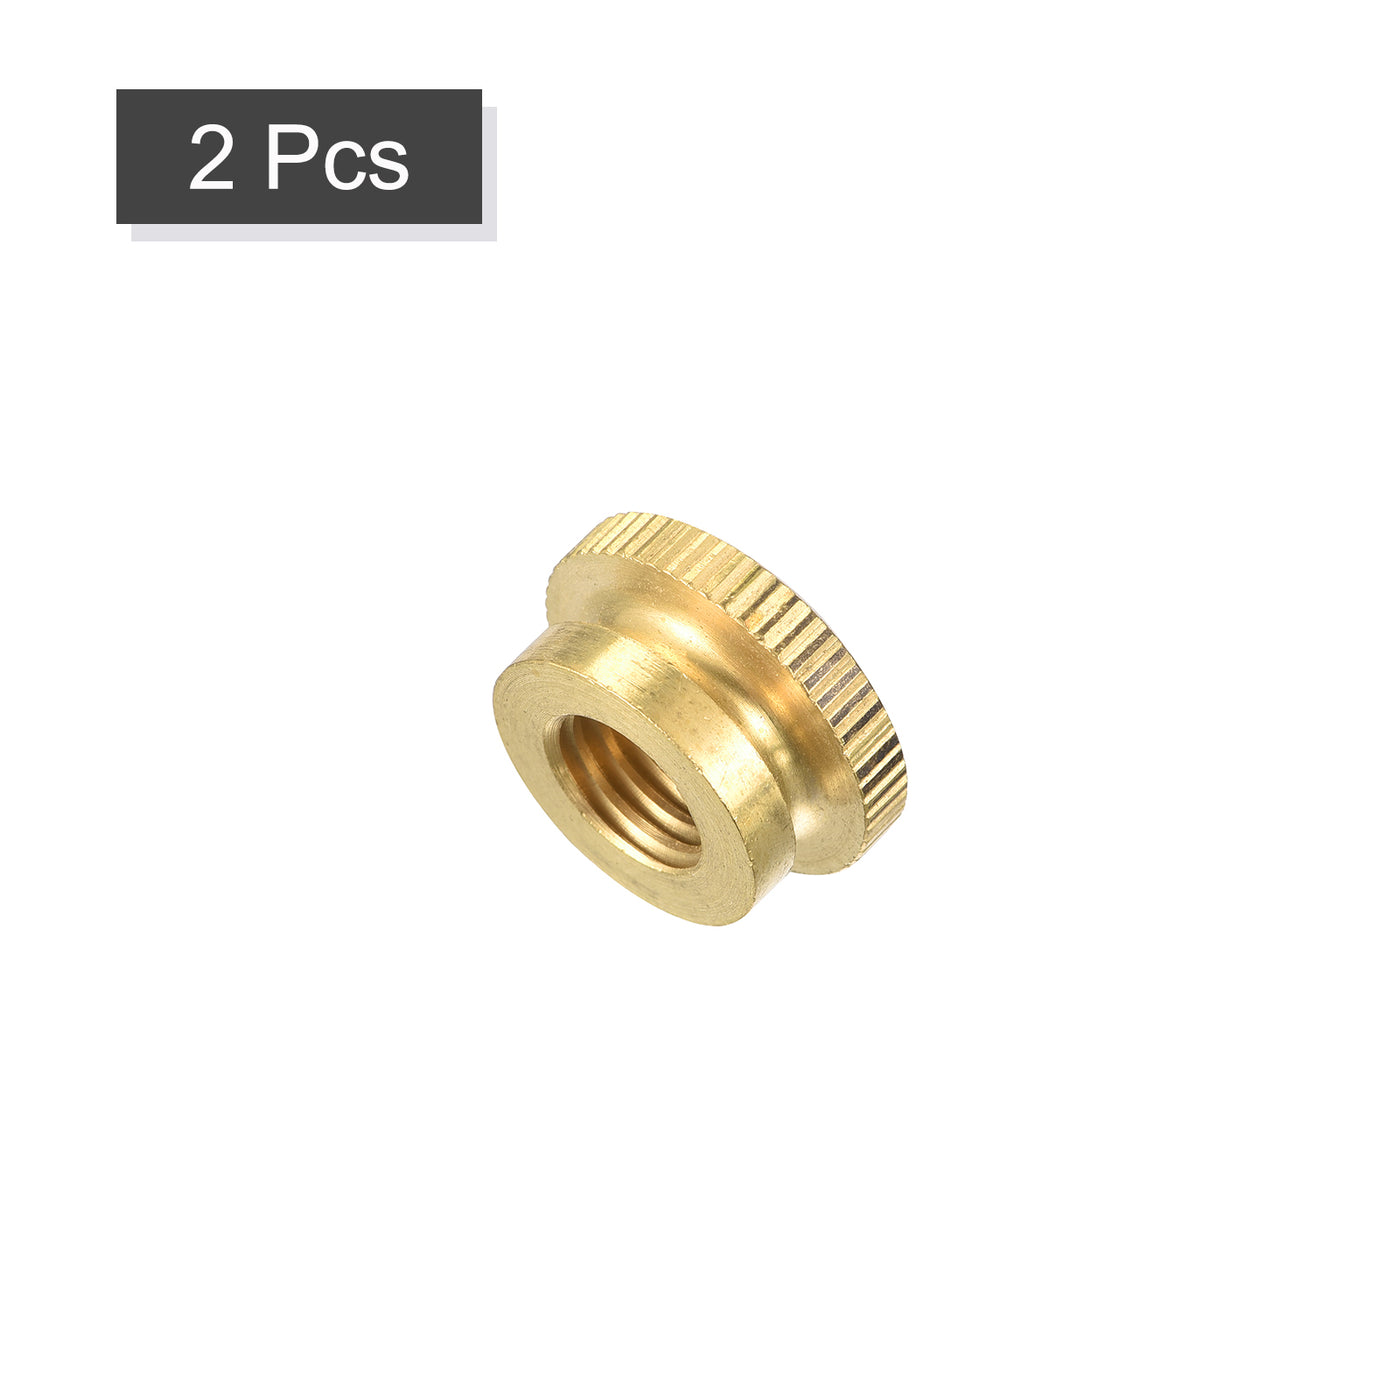 uxcell Uxcell Brass Knurled Thumb Nuts, M10x1.5mm Round Stepped Knobs Fasteners for 3D Printer, Electronic Equipment 2Pcs